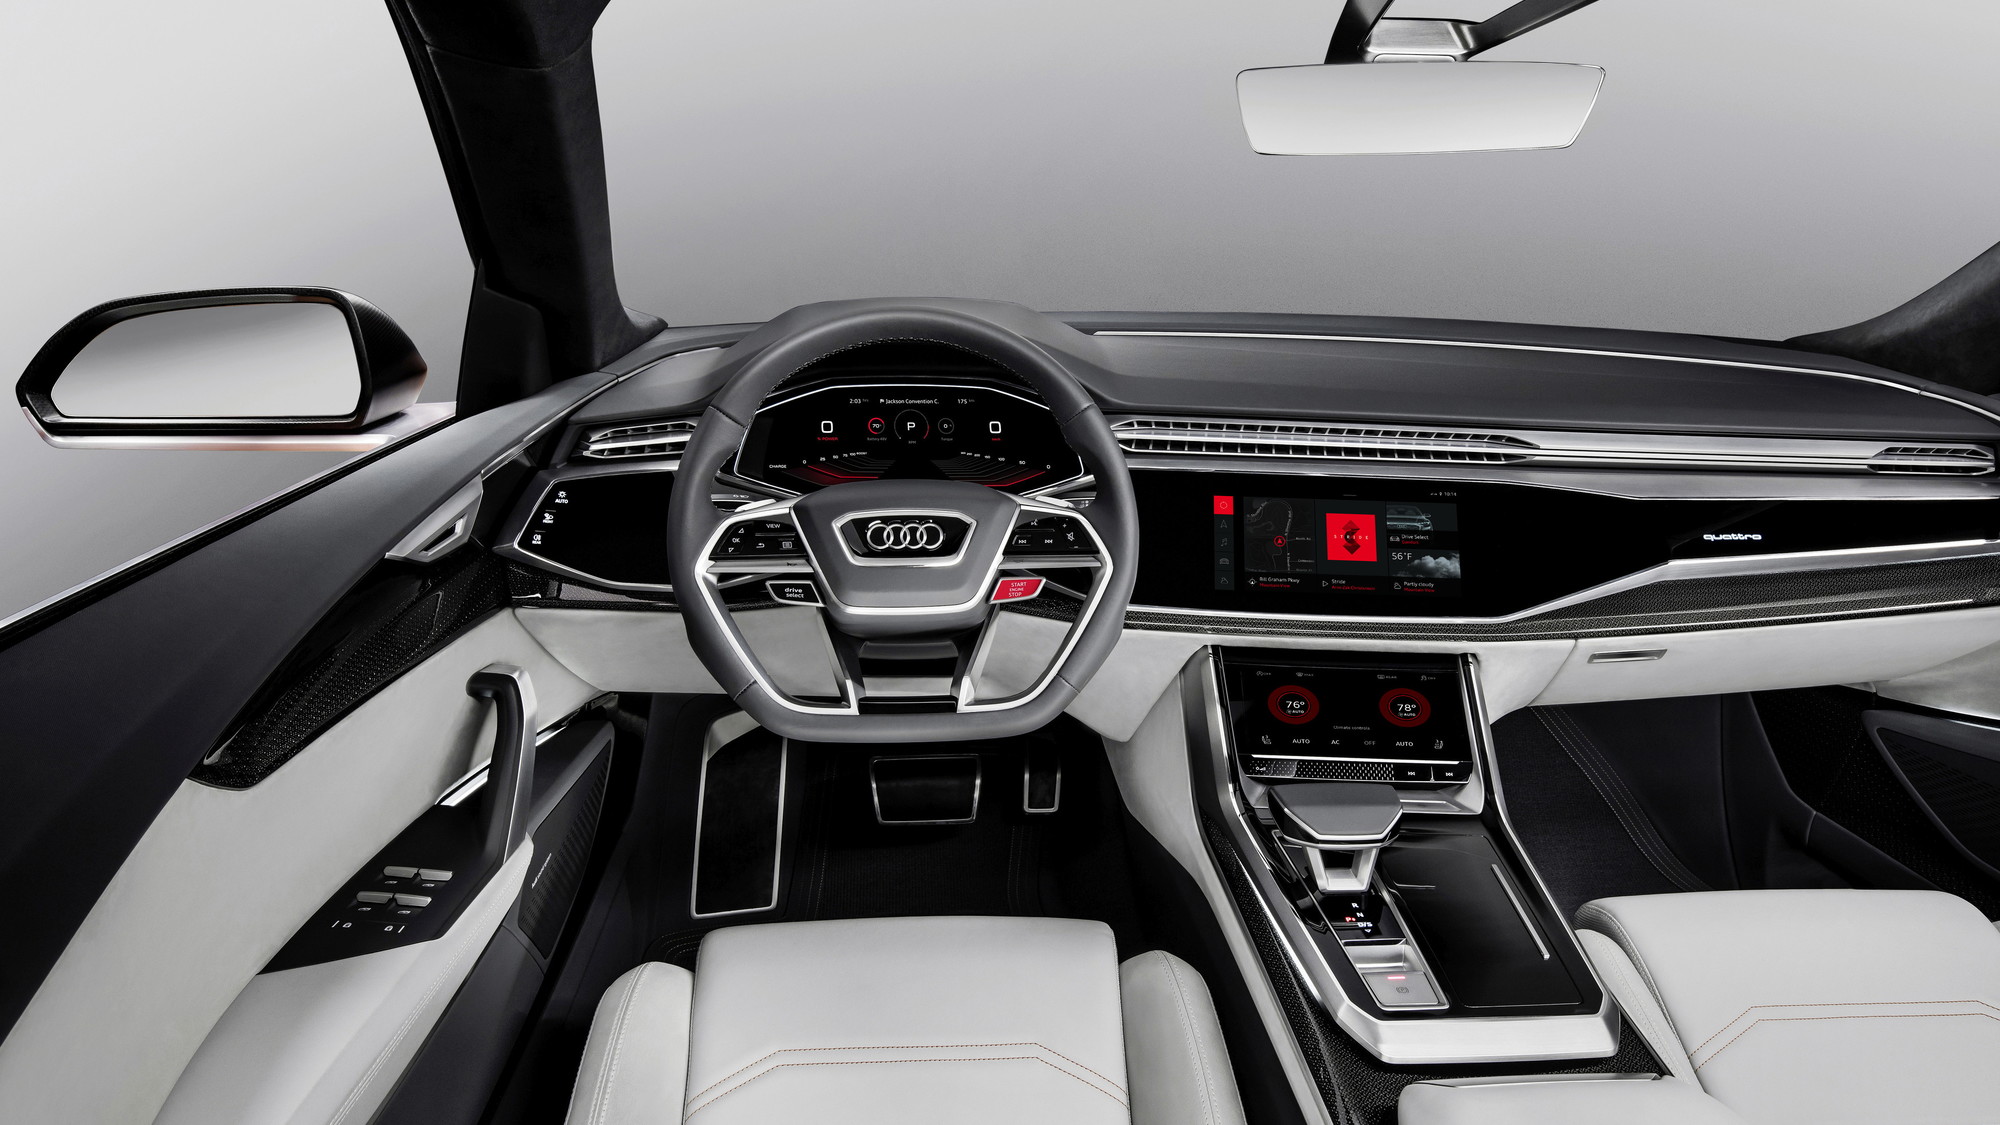 Audi Q8 Sport concept equipped with Android infotainment system